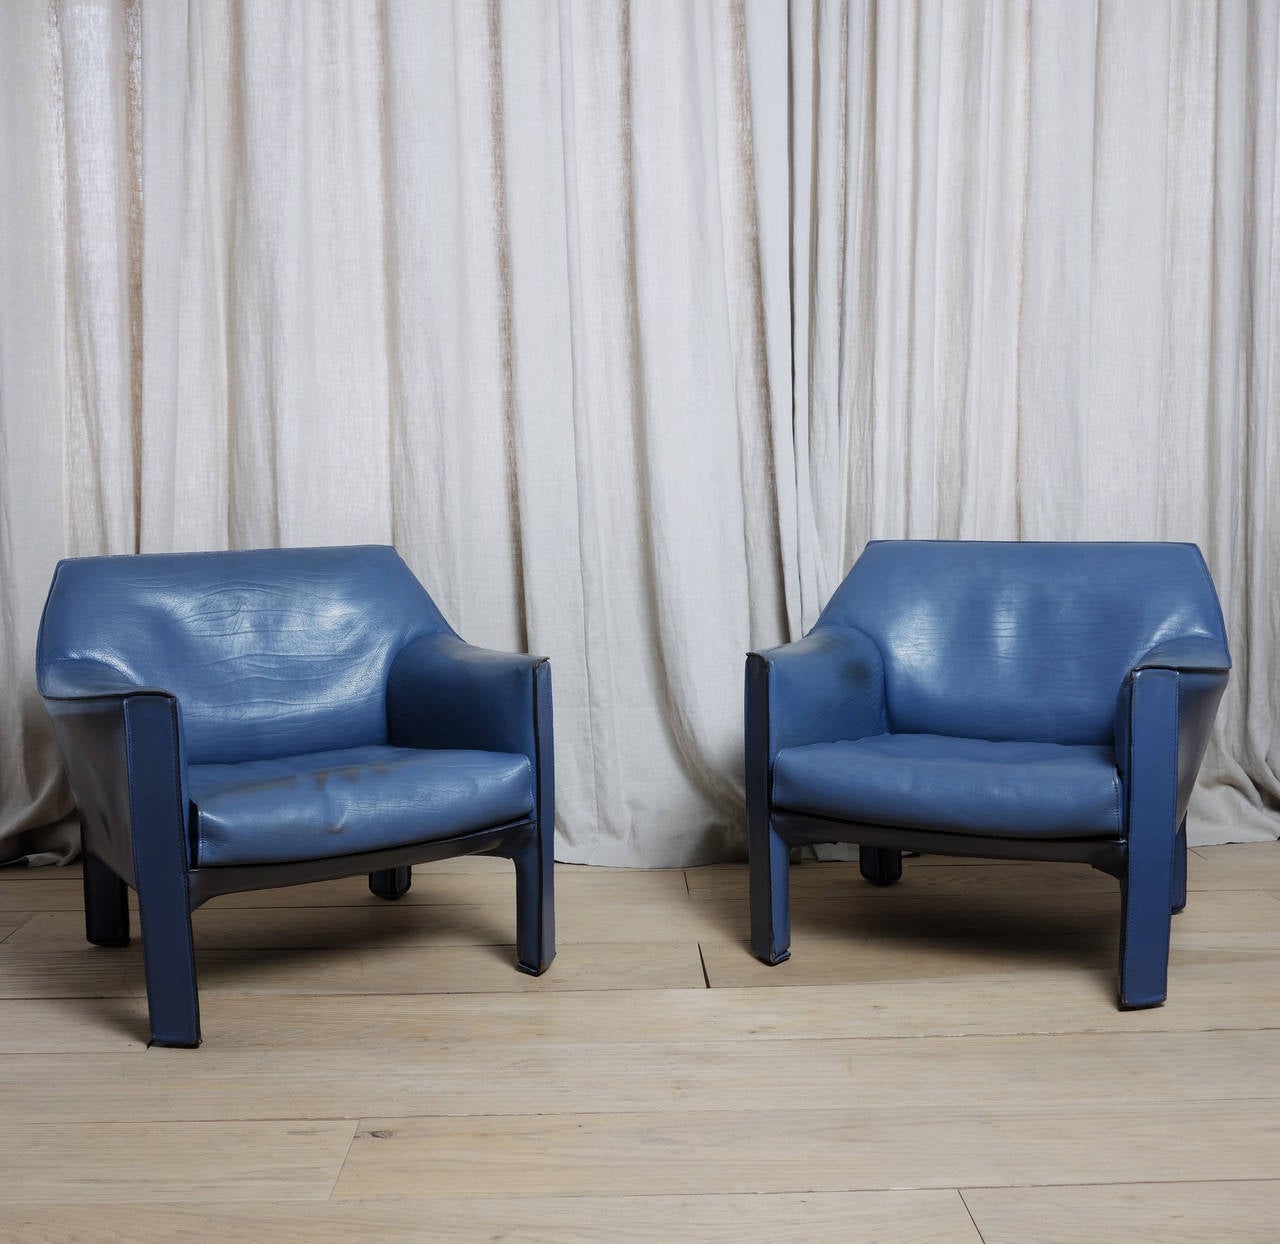 For the Cab series, Mario Bellini engineered a design whereby an enameled steel frame is wrapped in Dual-layered leather. We have never seen the club chair in this gorgeous blue. The thick, soft bull's hide has achieved a wonderful patina. The